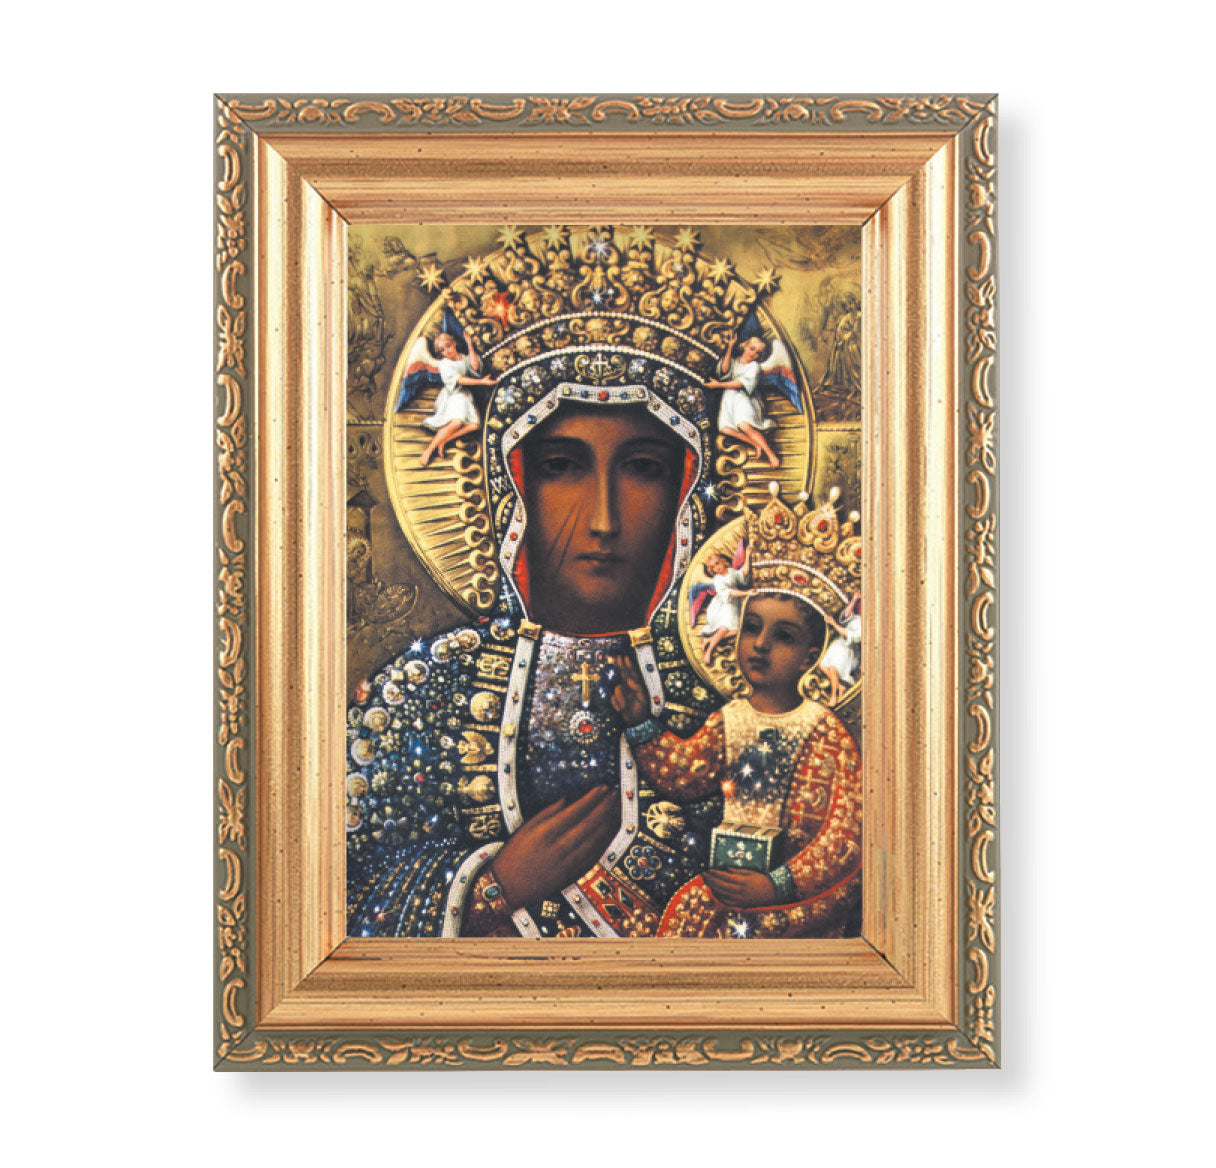 Our Lady of Czestochowa Antique Gold Framed Art